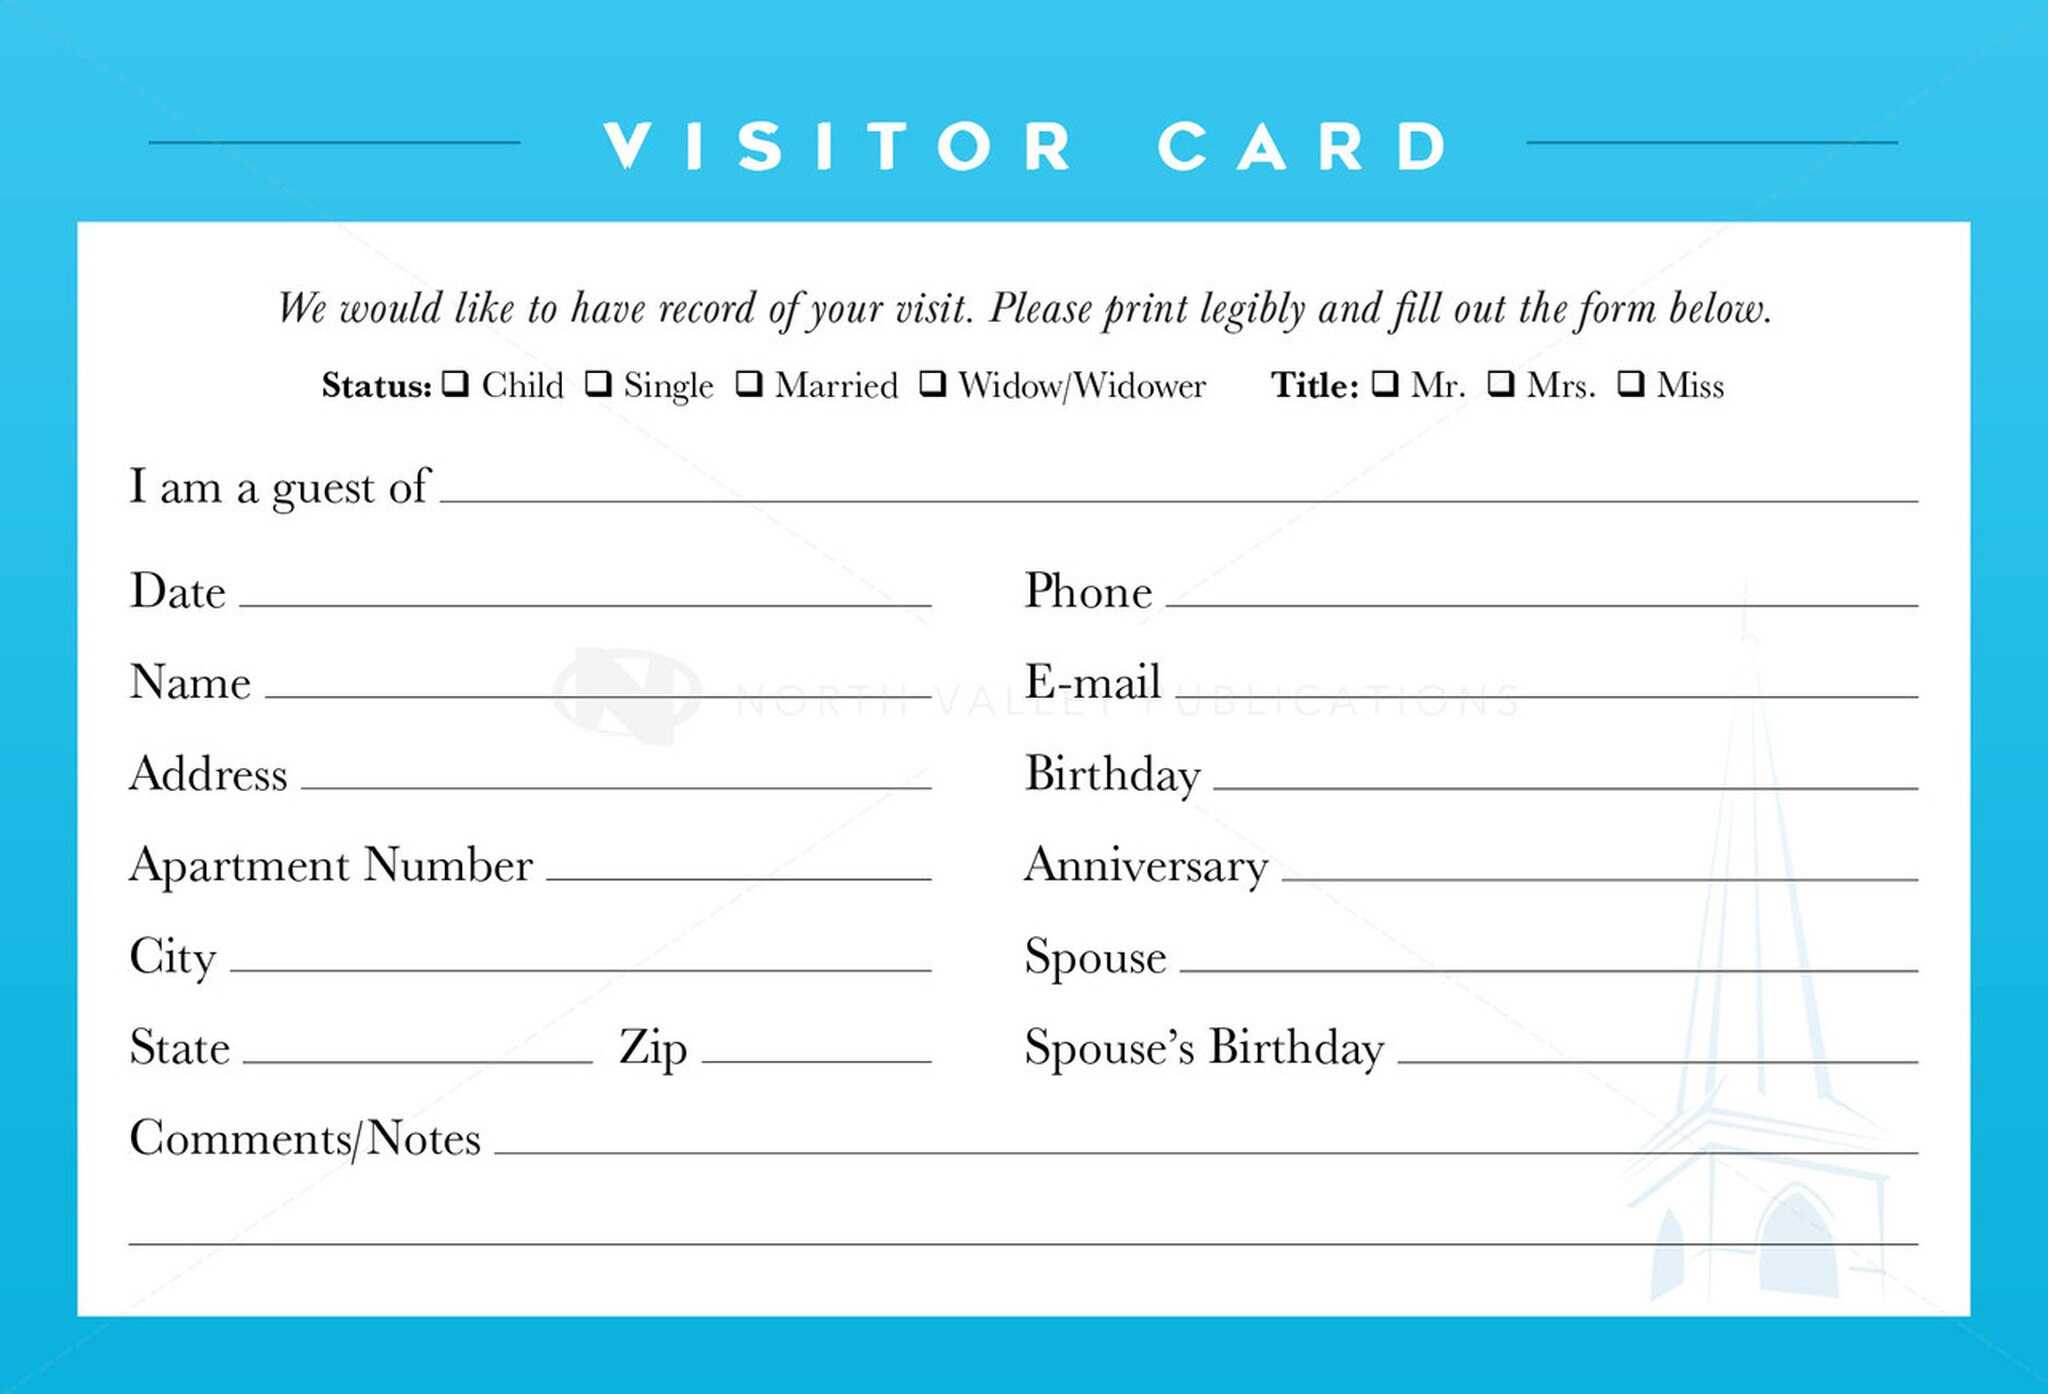 62D2C Guest Card Template | Wiring Library For Church Visitor Card Template